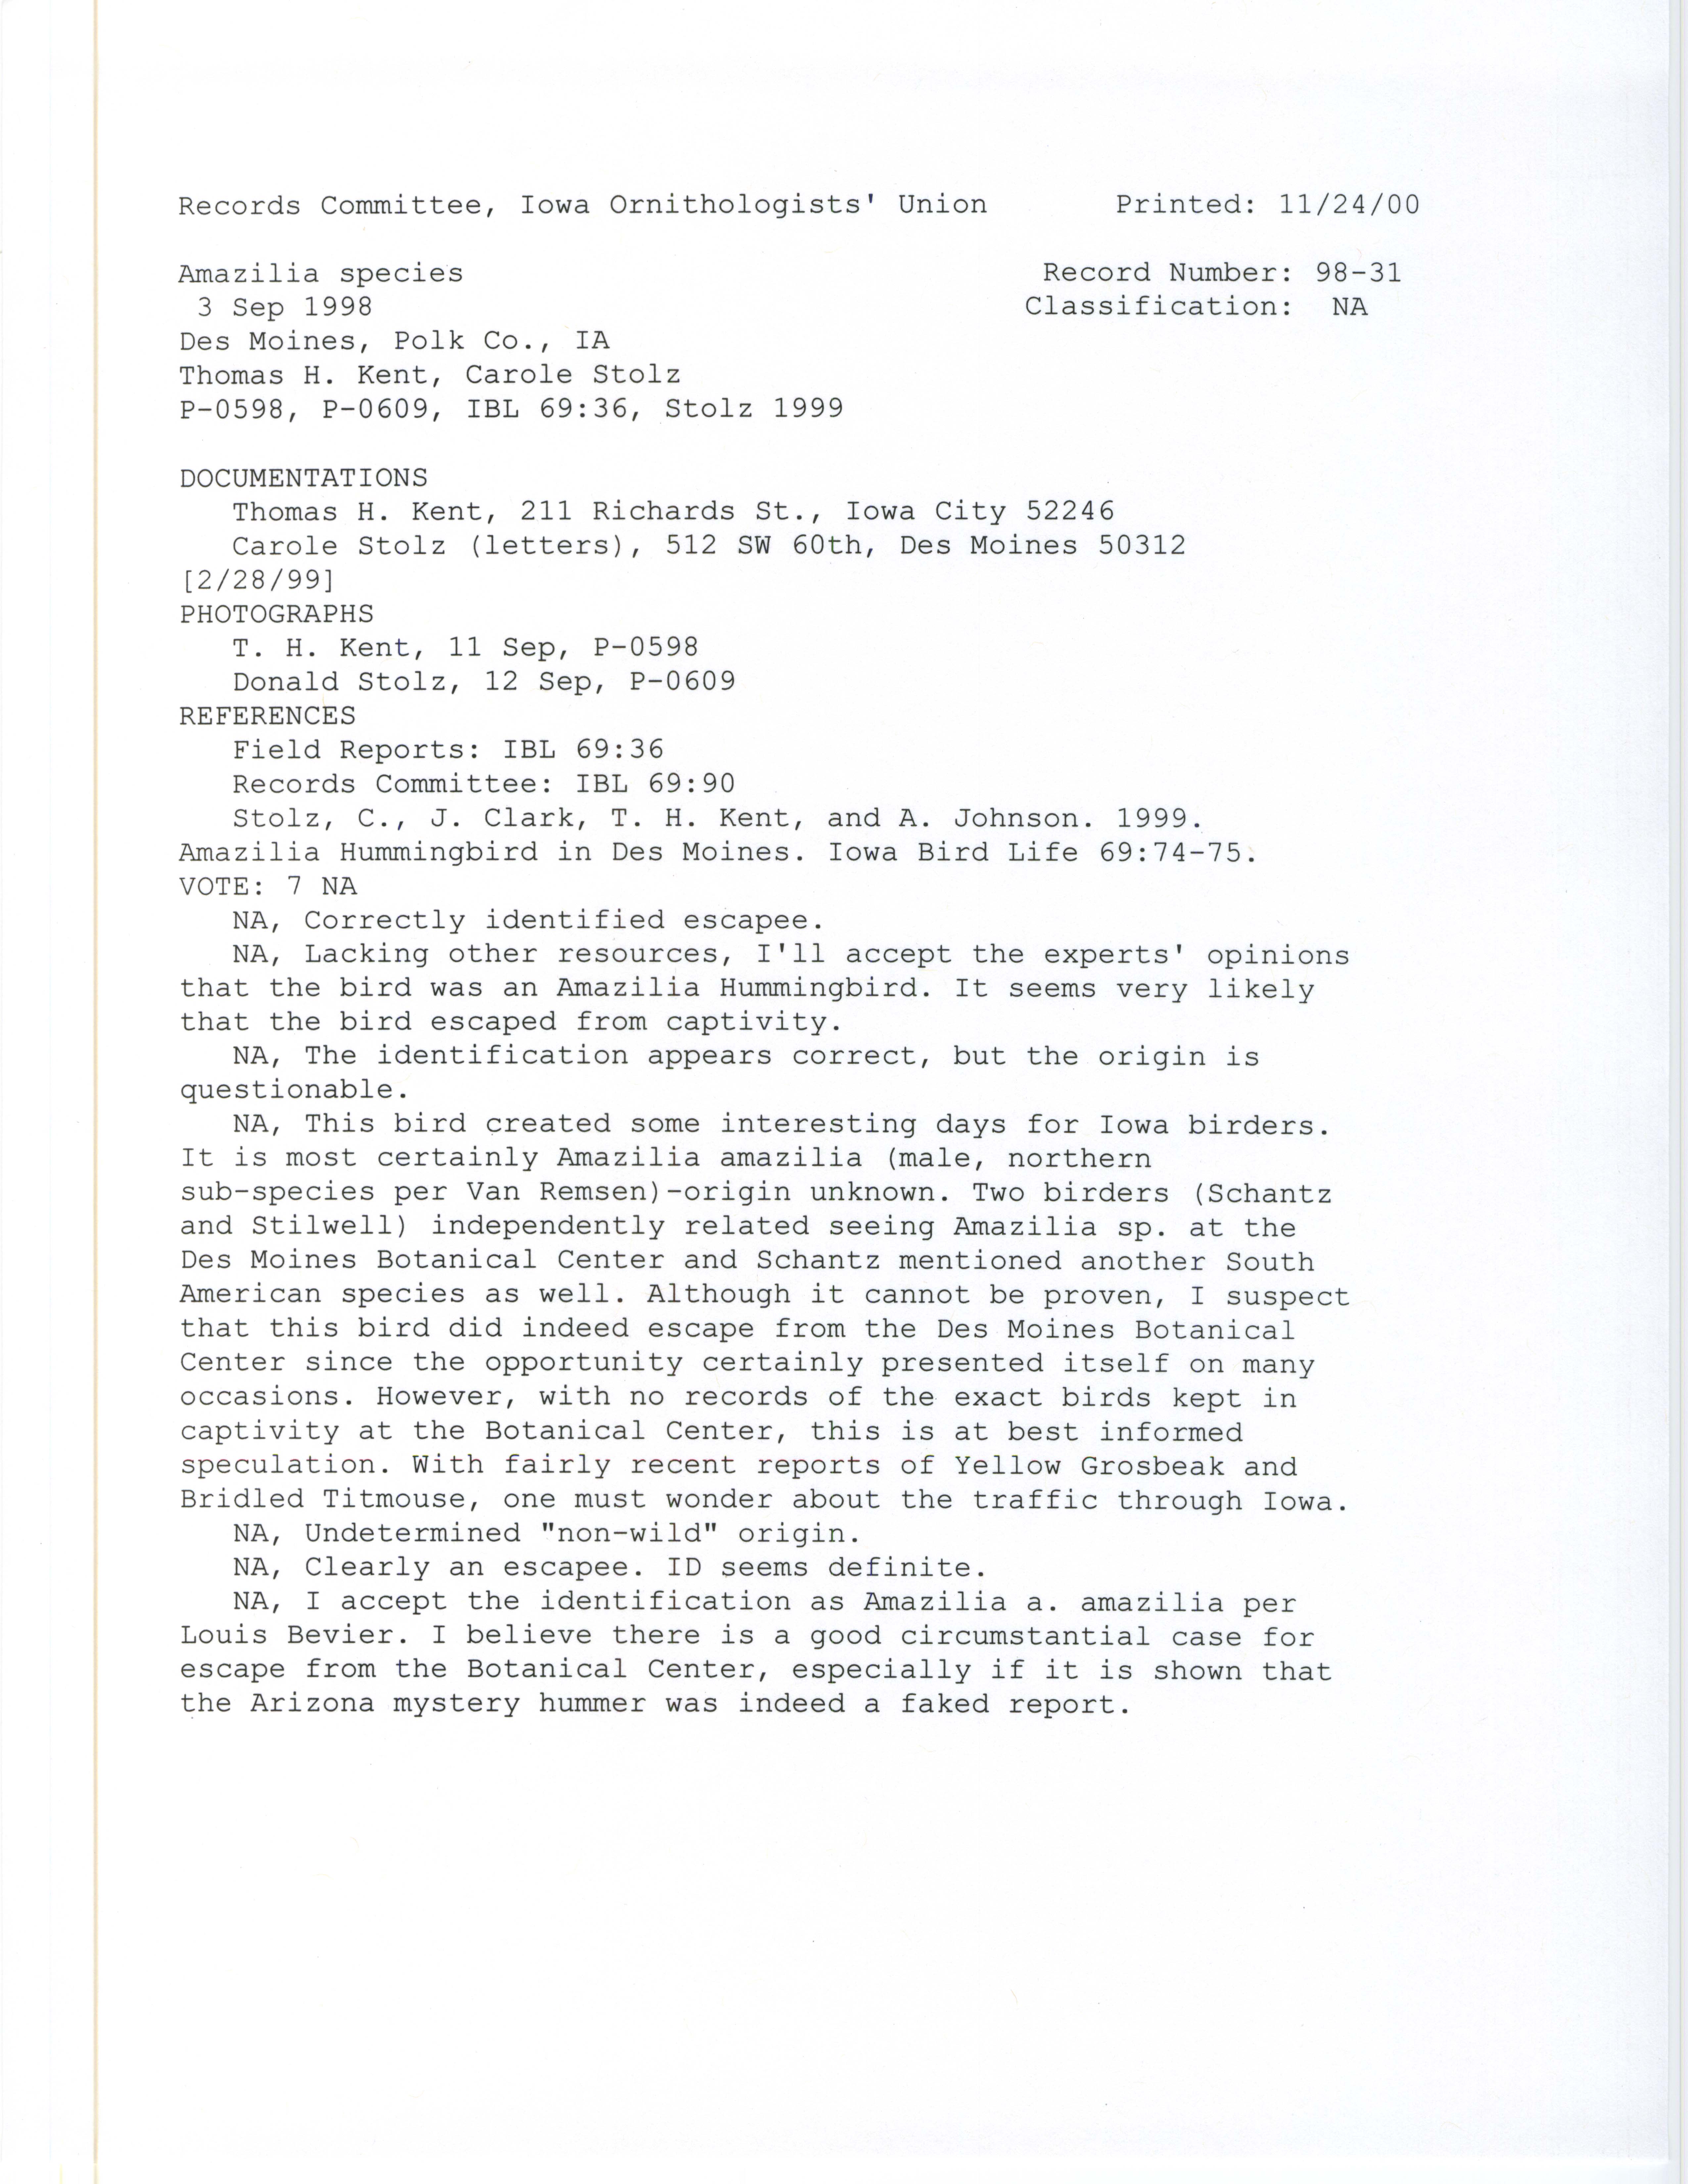 Records Committee review for rare bird sighting for Amazilia species at Des Moines, 1998